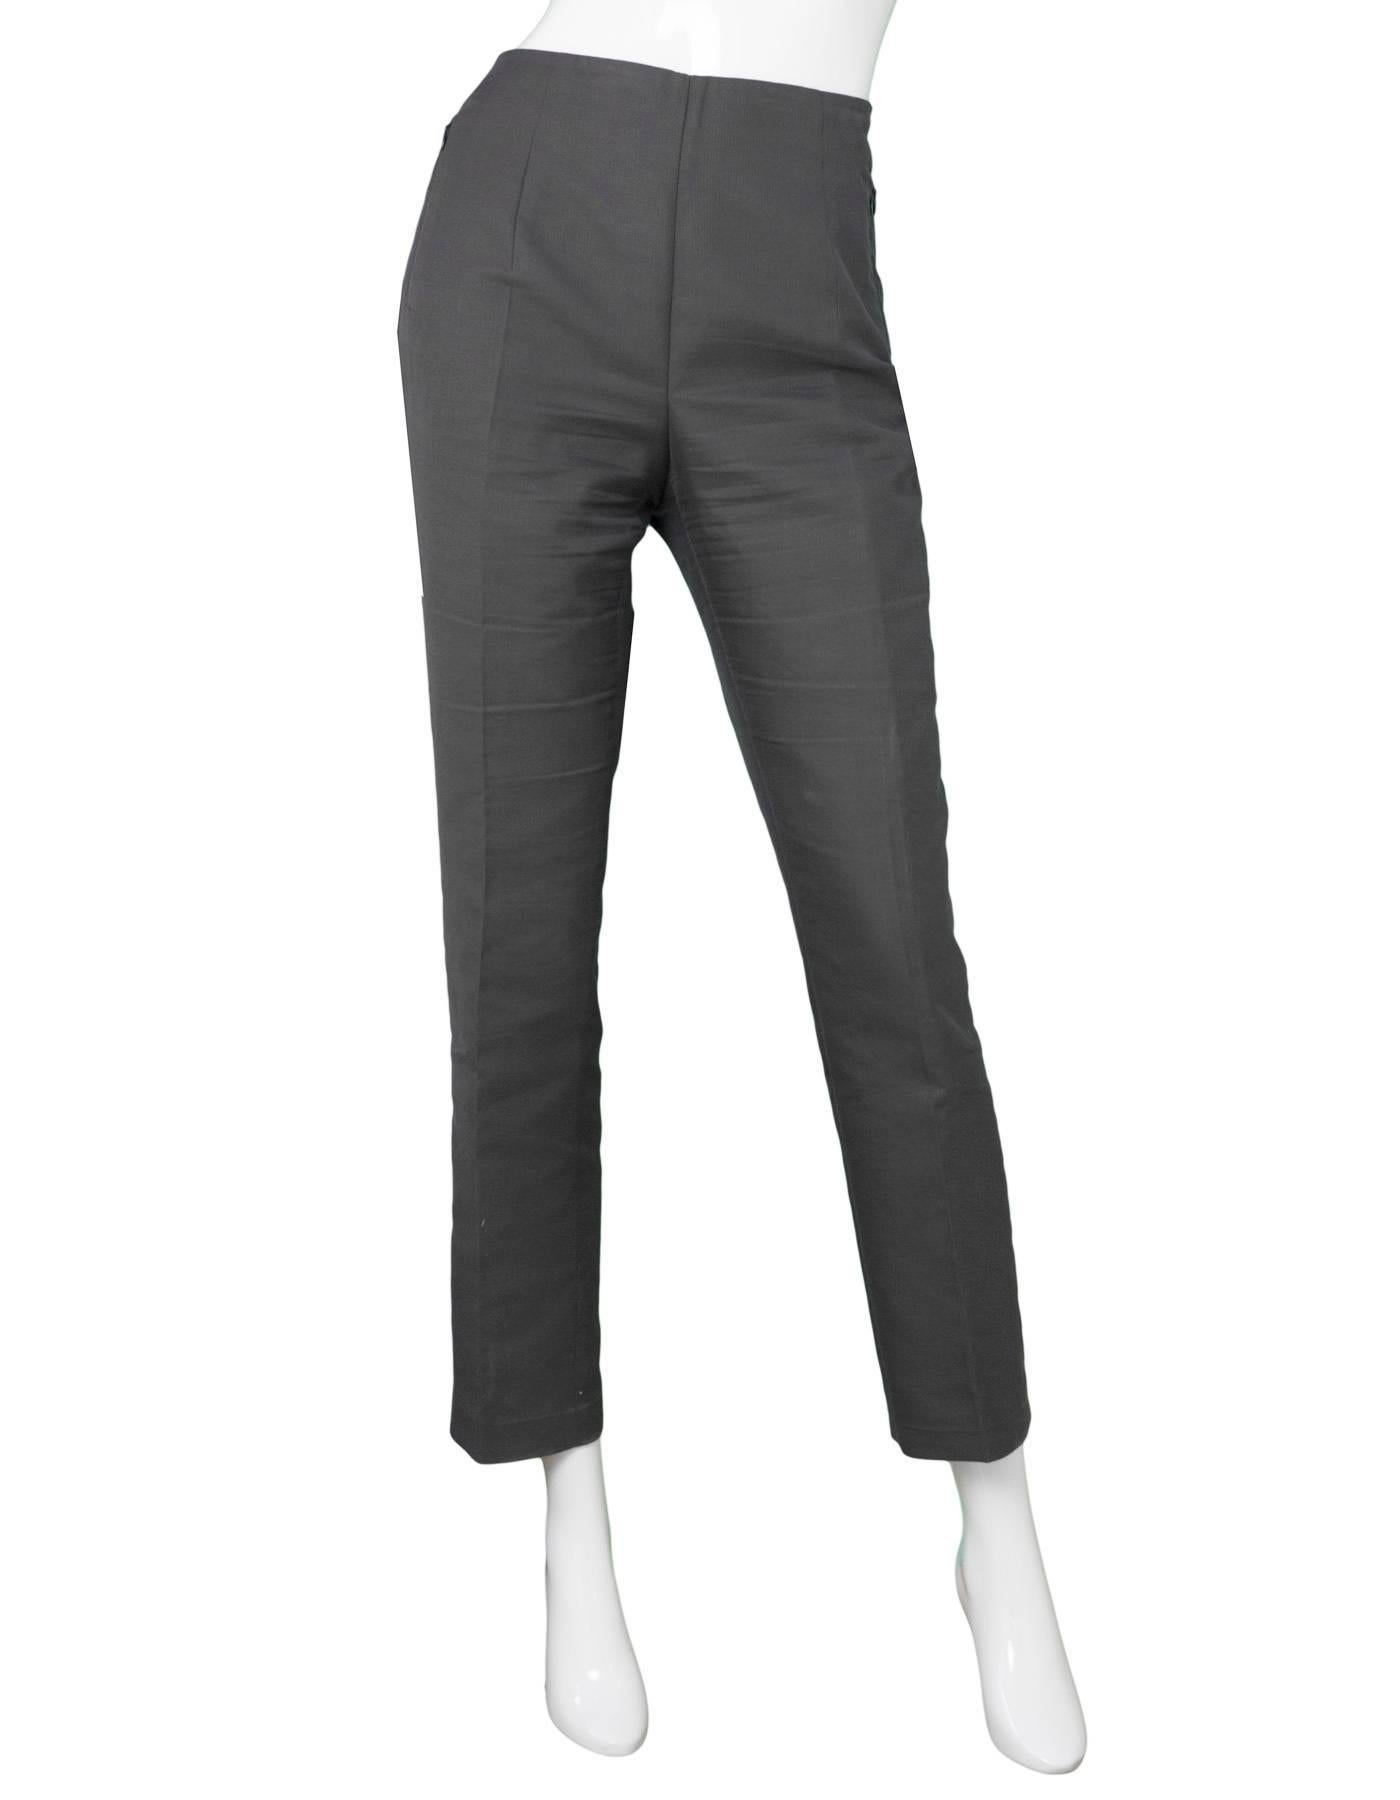 Akris Grey Cropped Pants Sz 8

Made In: Romania
Color: Grey
Composition: 59% cotton, 39% silk, 2% nylon
Lining: None
Closure/Opening: Hidden side zip and button closure
Exterior Pockets: Zip pockets at hips
Overall Condition: Excellent pre-owned